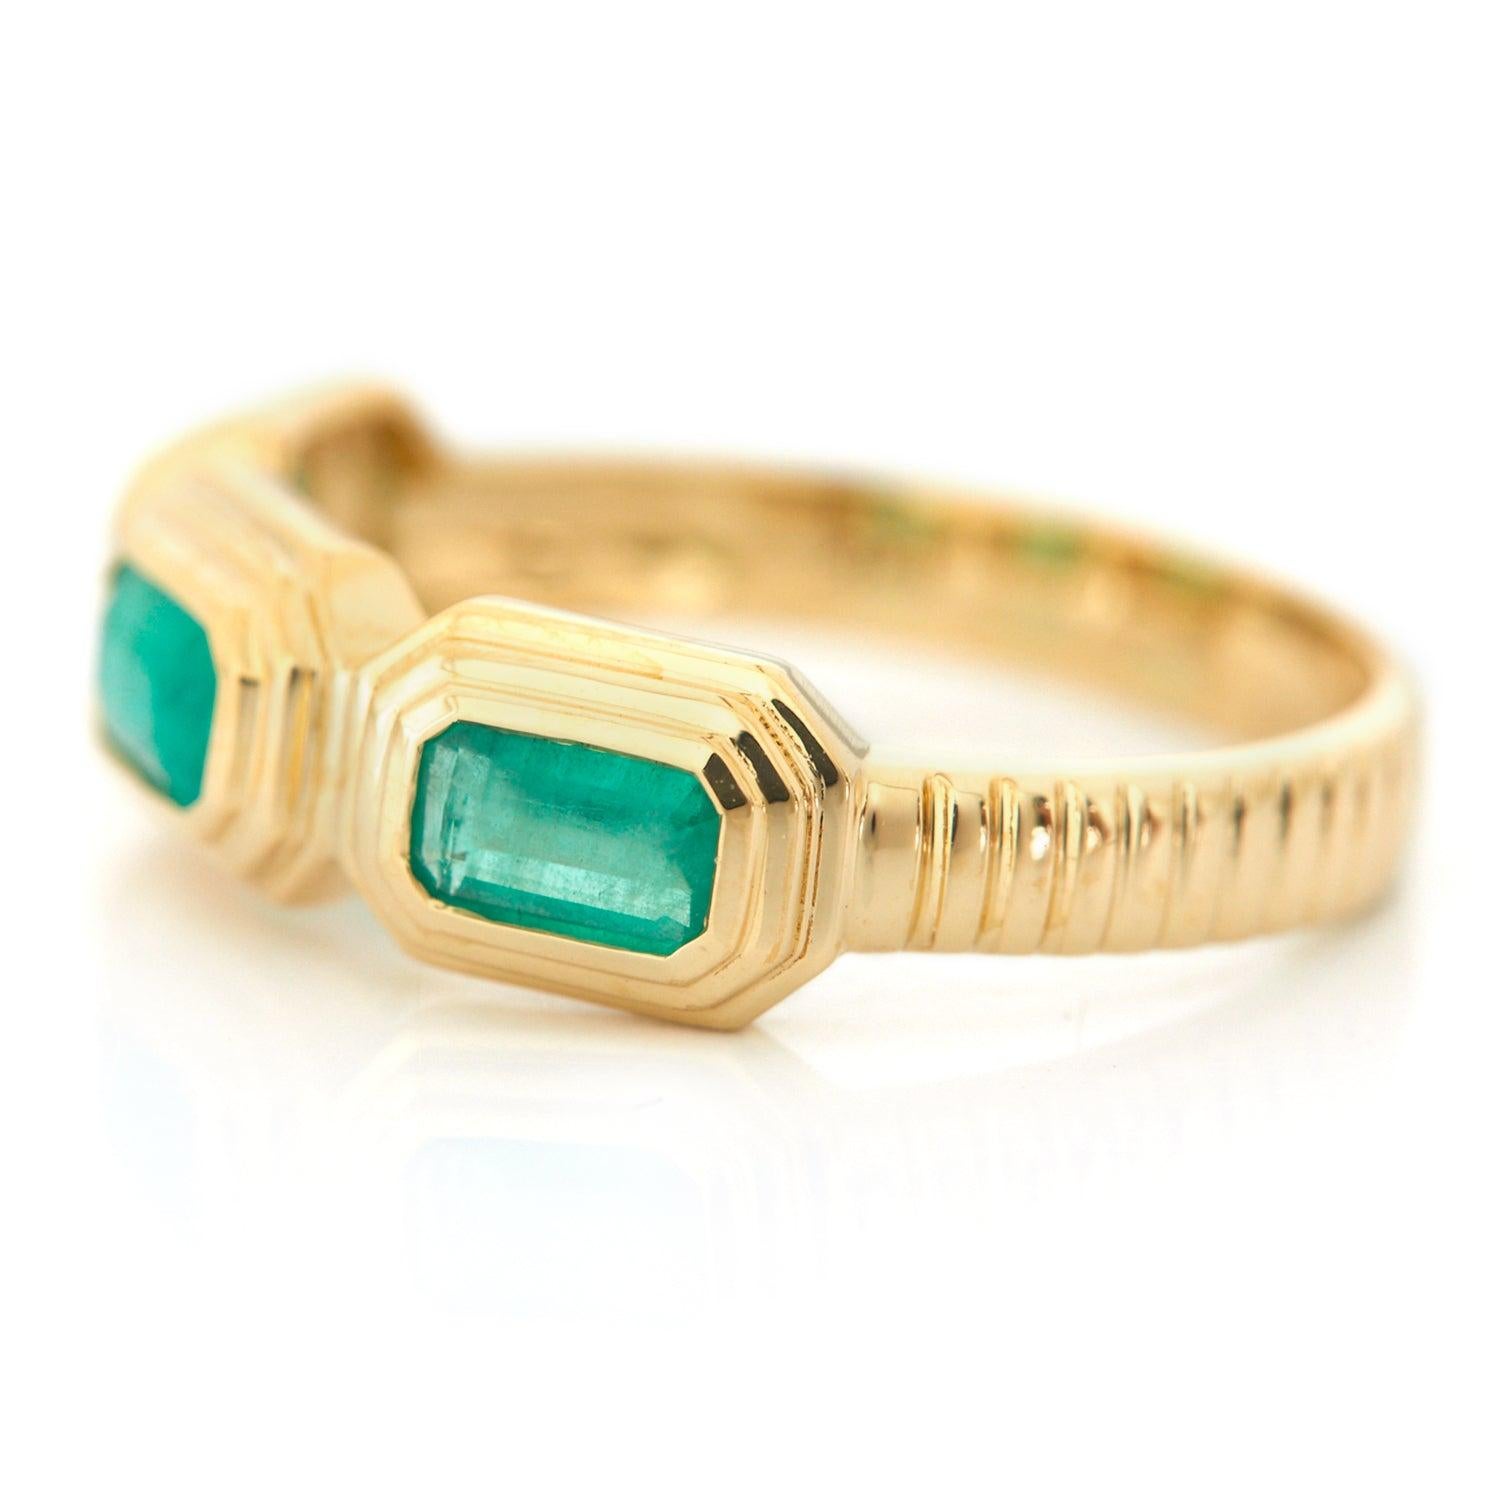 For Sale:  YI Collection Emerald Baxter Ring in 18k 5